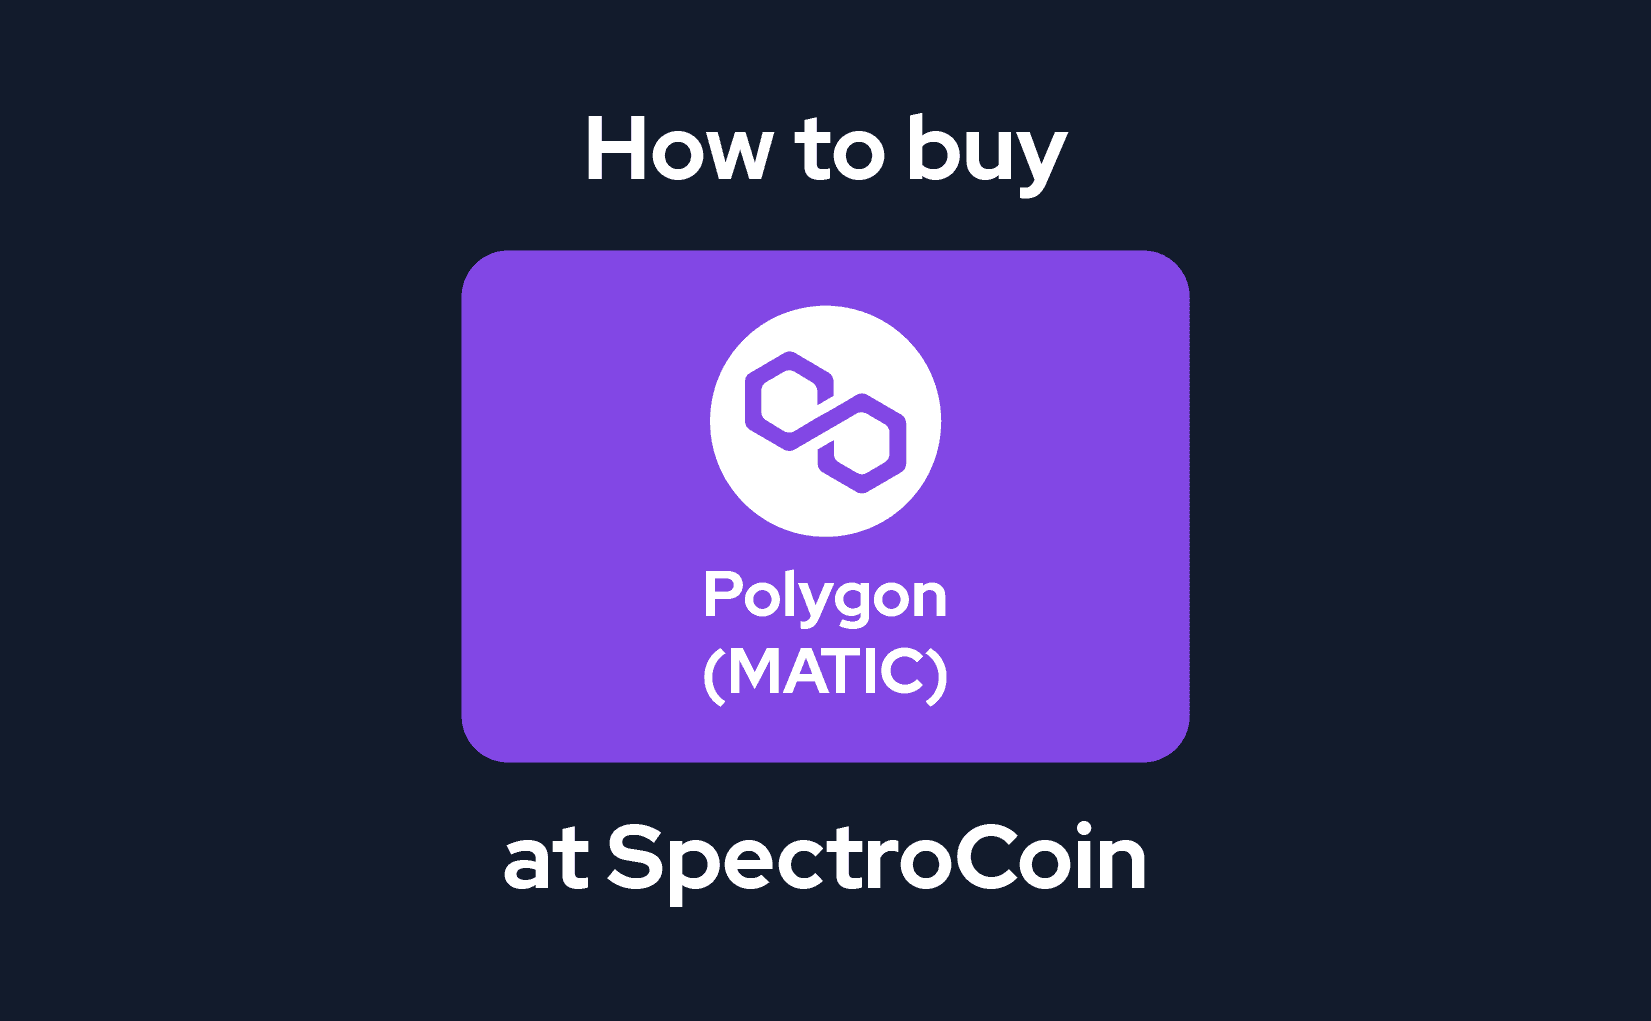 How to buy Polygon (Matic)?